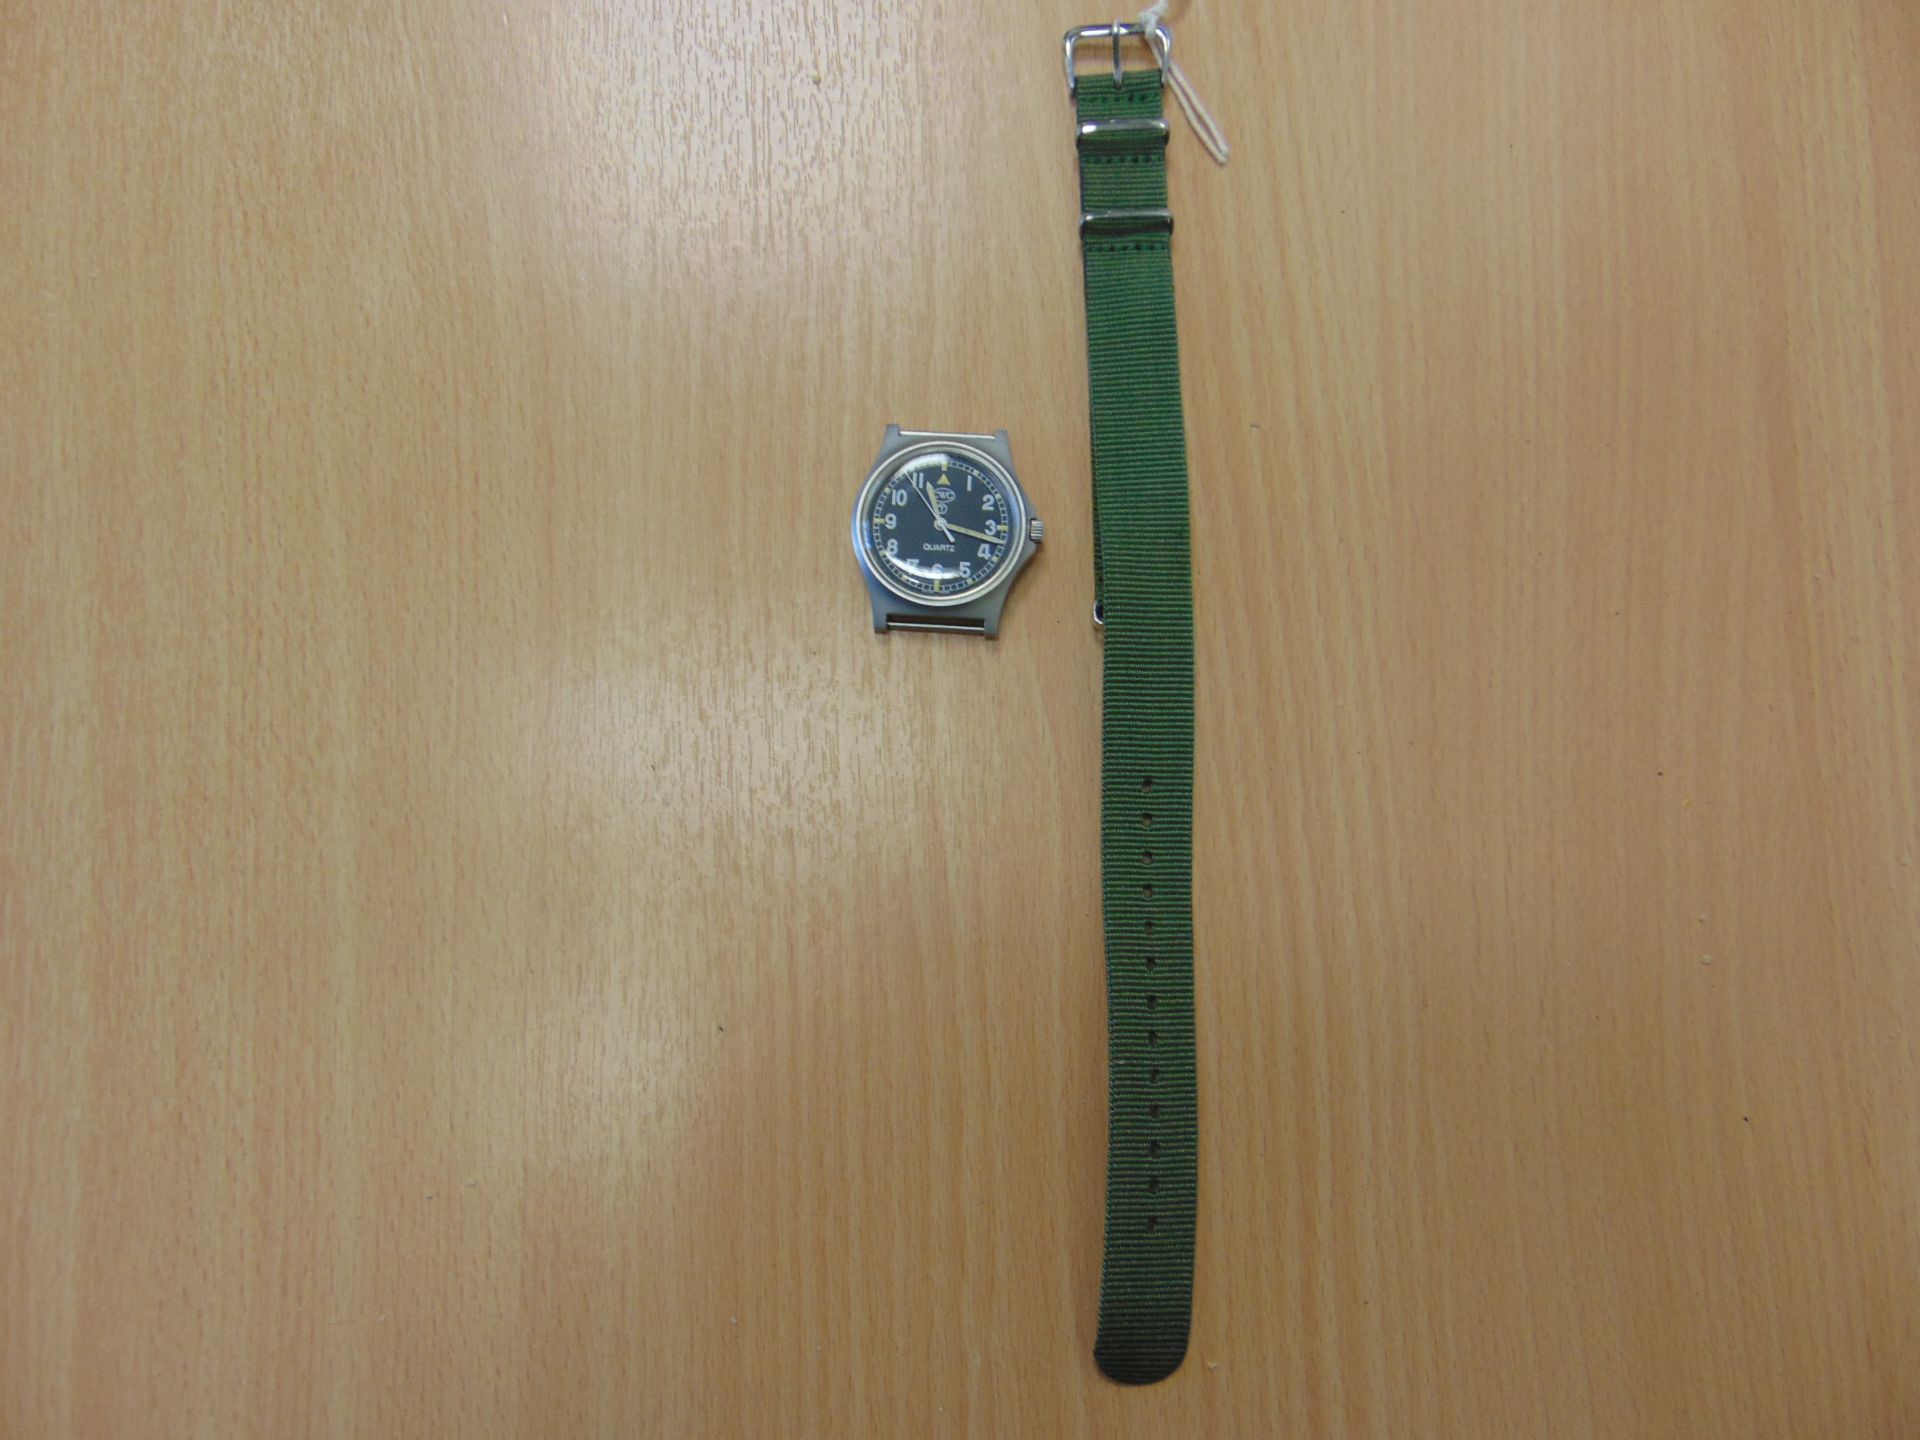 UNISSUED CWC W10 SERVICE WATCH -WATER RESISTENT TO 5ATM NATO MARKED DATED 2006 - Image 9 of 10